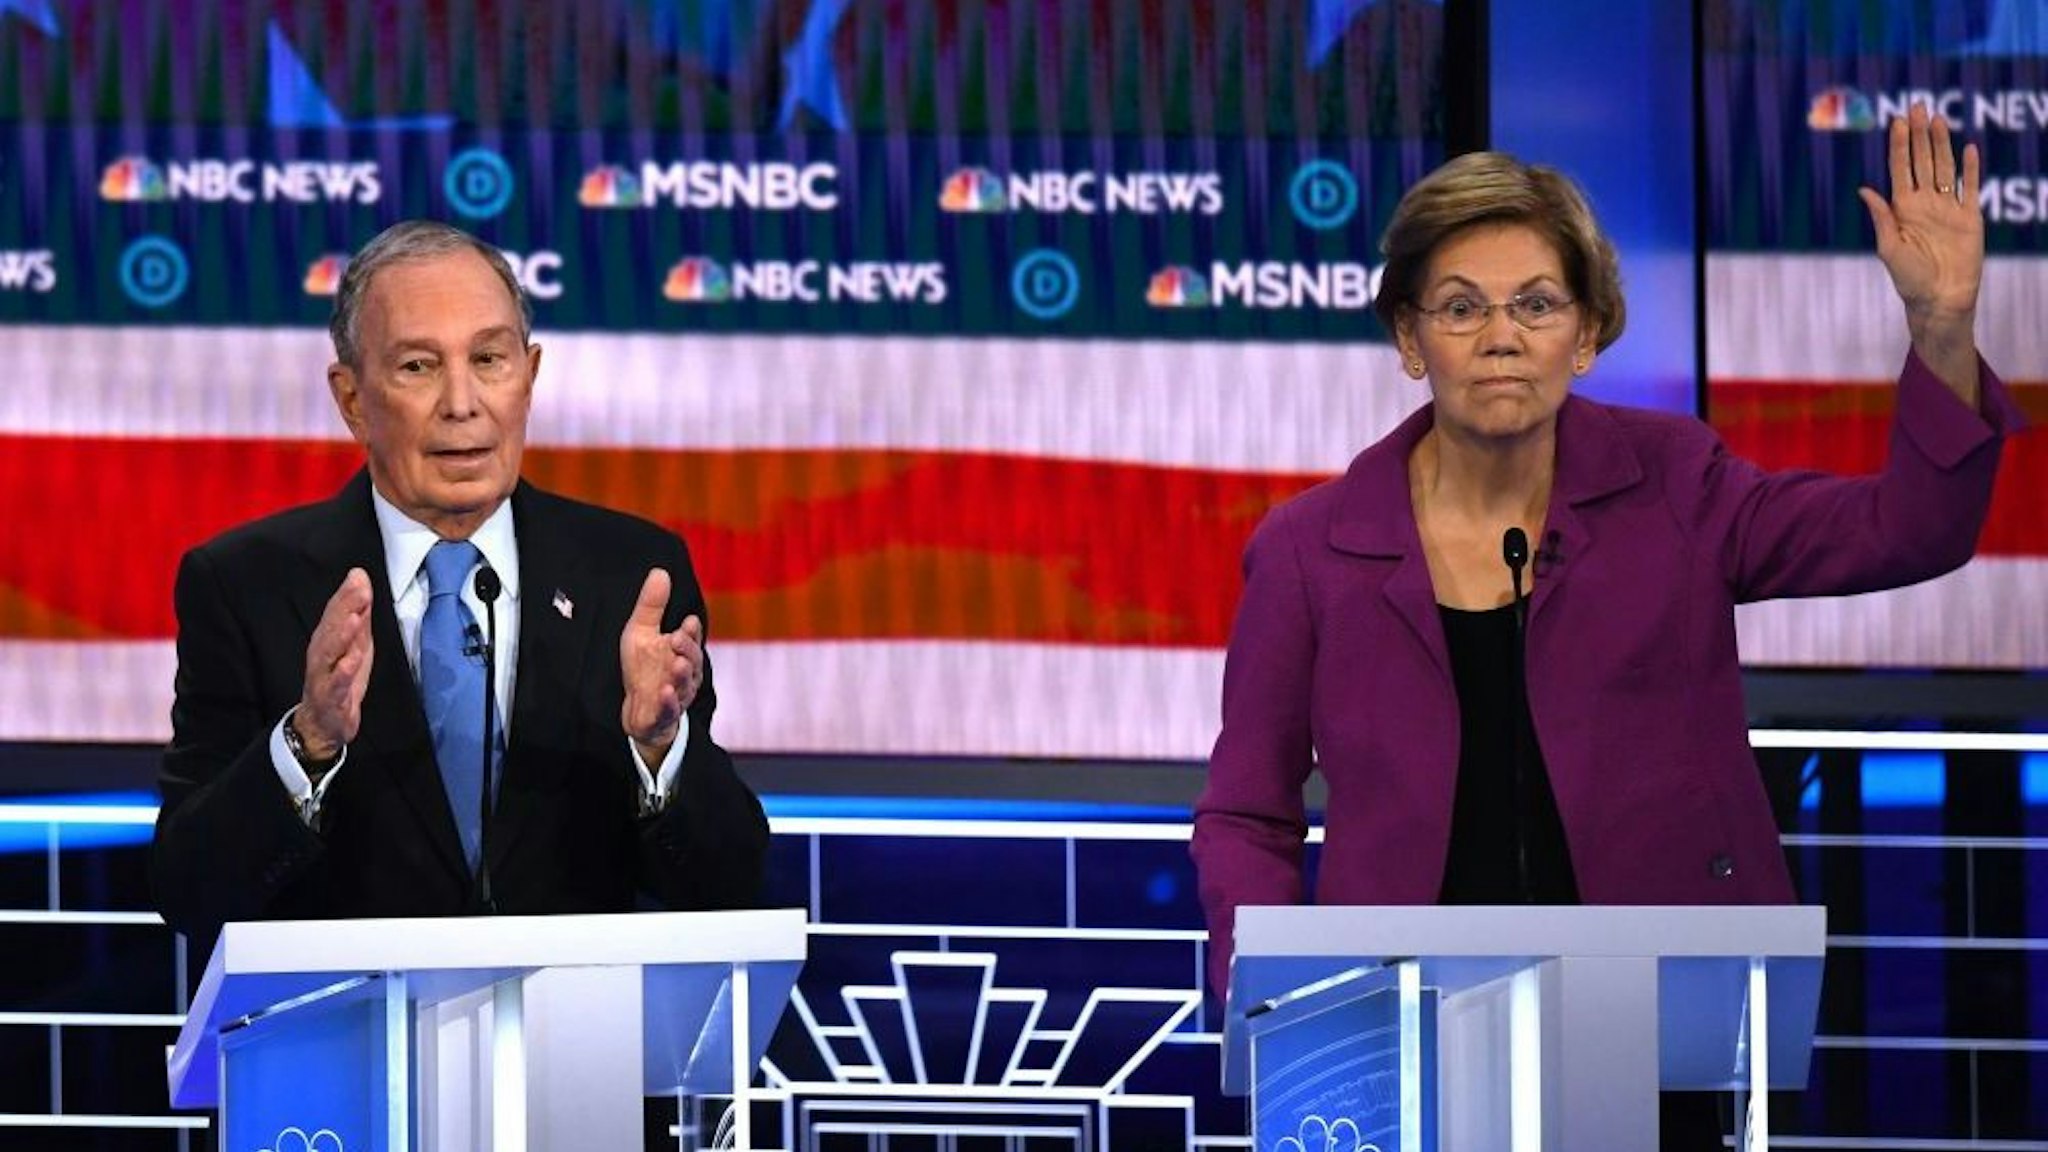 Democratic presidential hopeful Massachusetts Senator Elizabeth Warren (R) gestures next to former New York Mayor Mike Bloomberg during the ninth Democratic primary debate of the 2020 presidential campaign season co-hosted by NBC News, MSNBC, Noticias Telemundo and The Nevada Independent at the Paris Theater in Las Vegas, Nevada, on February 19, 2020. (Photo by Mark RALSTON / AFP)